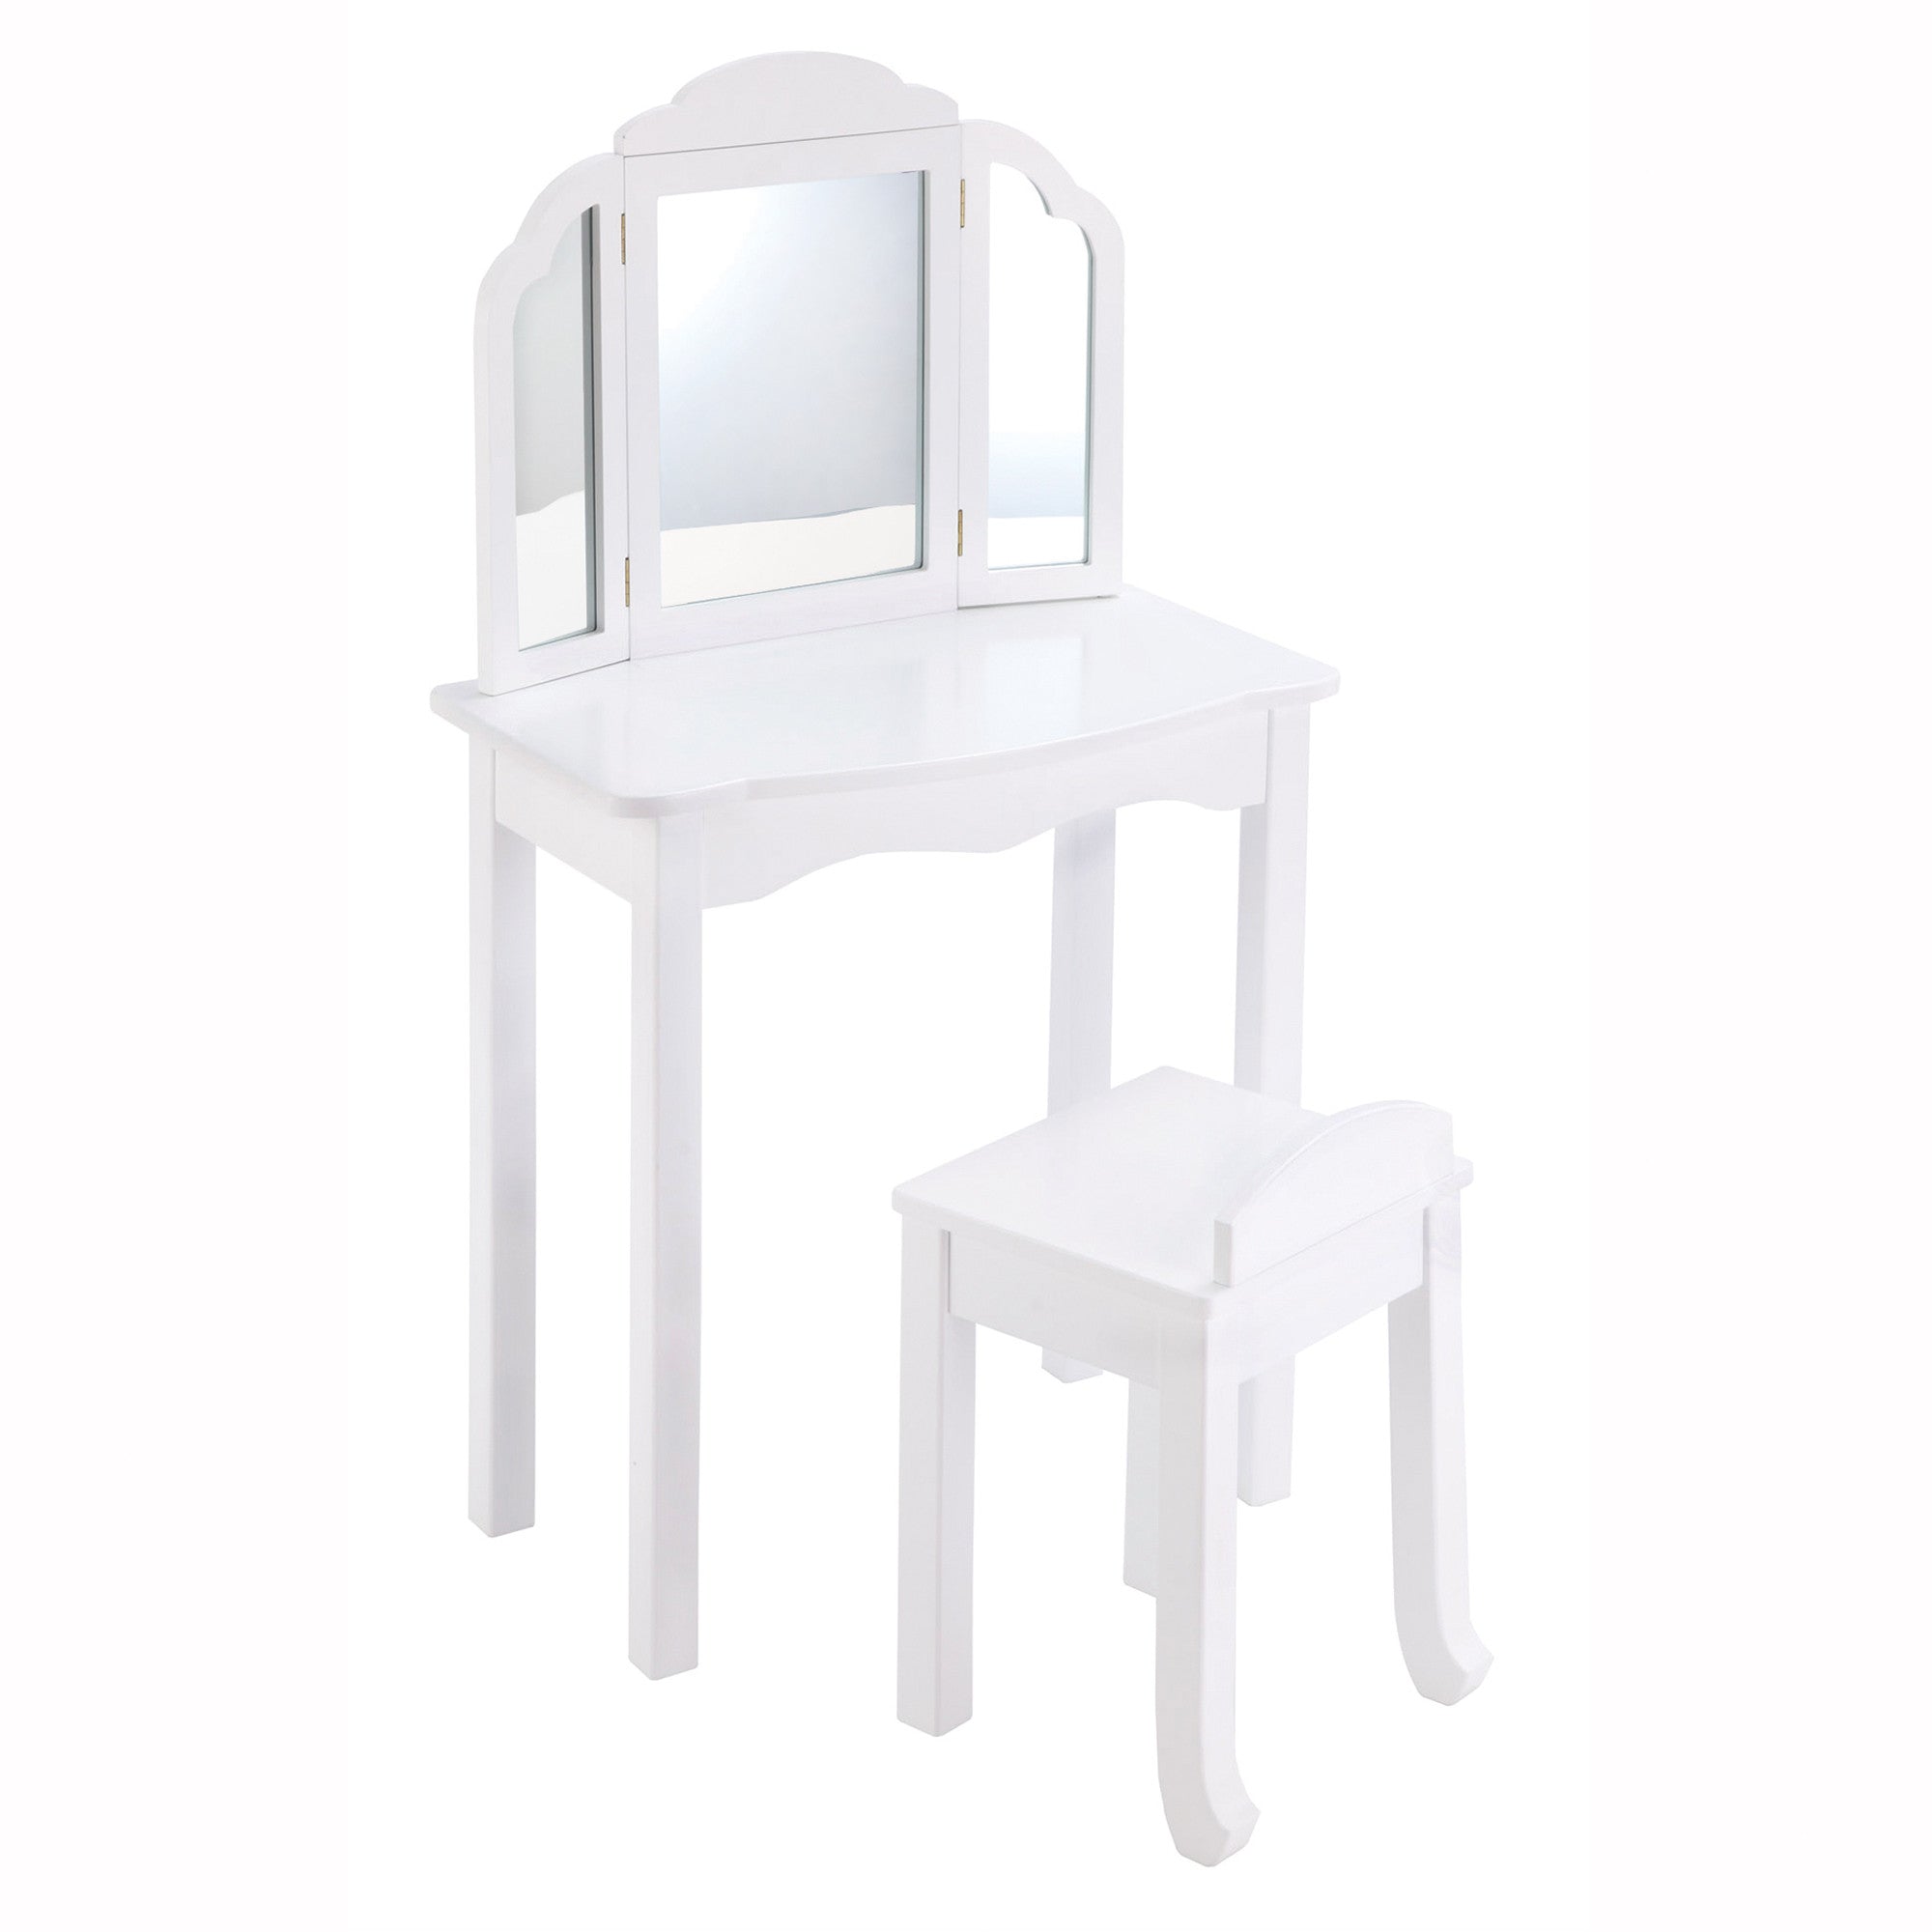 Guidecraft Expressions Vanity & Stool: White G87104